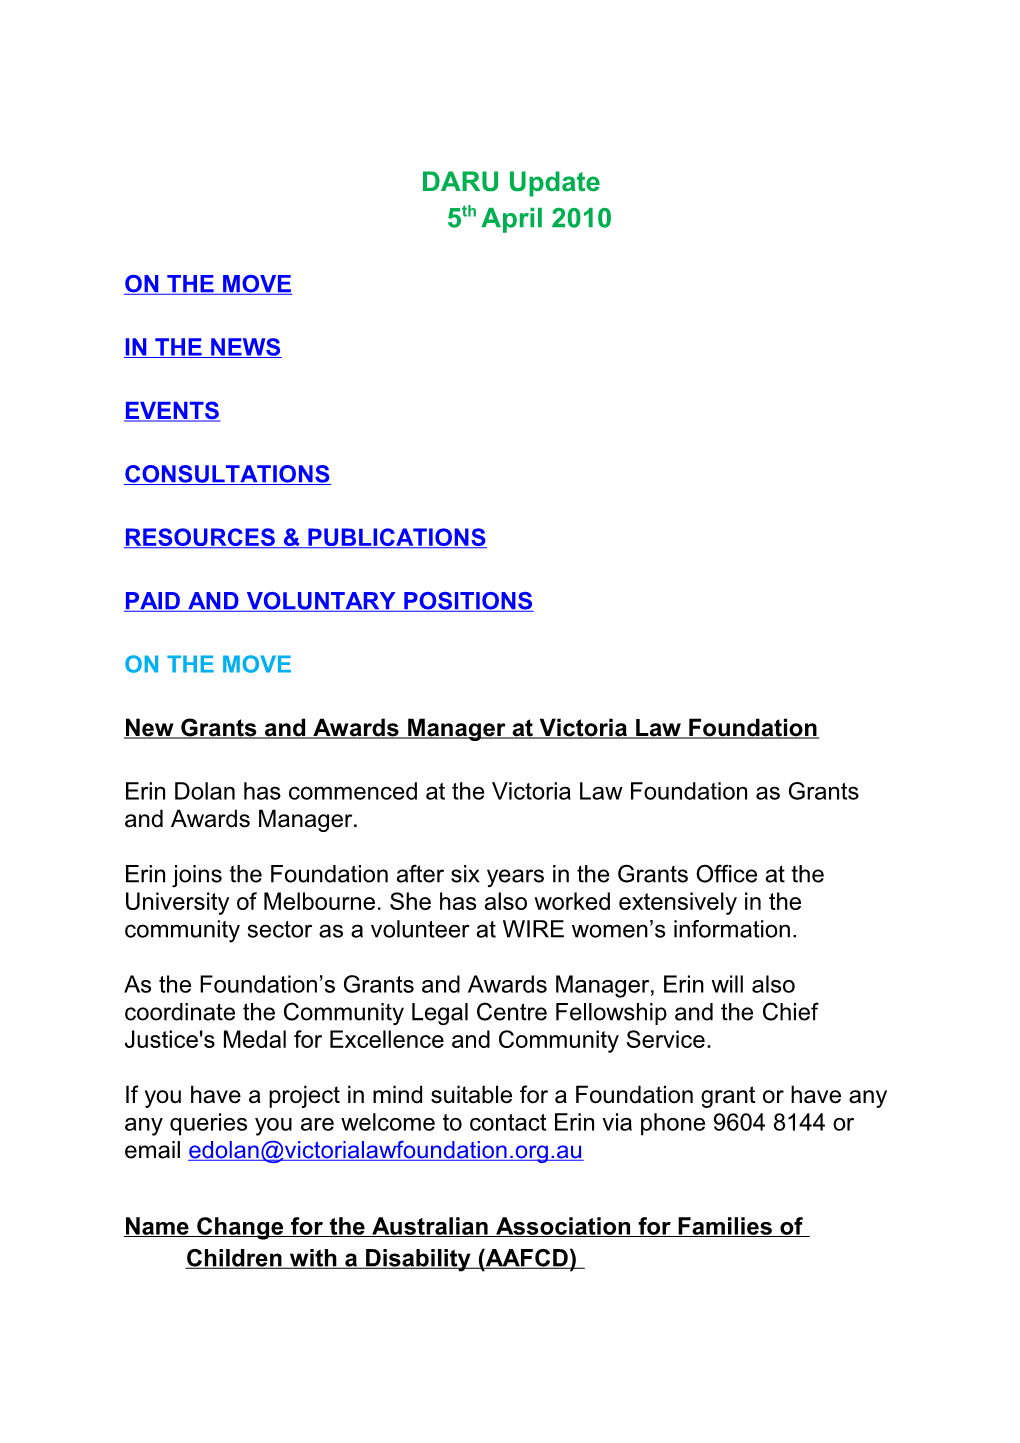 New Grants and Awards Manager at Victoria Law Foundation